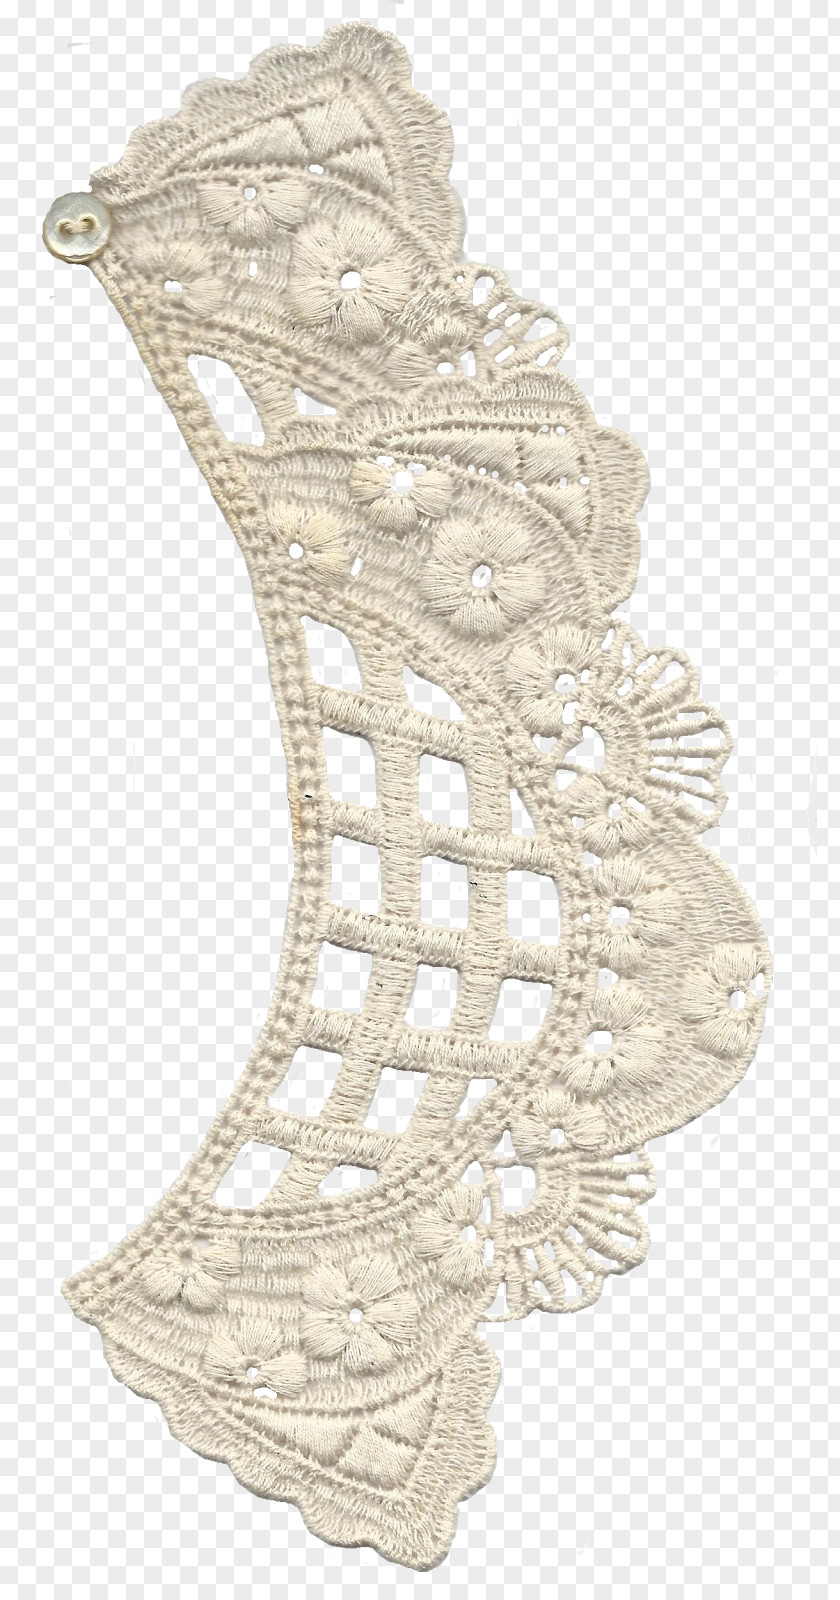 Lace Certificate PNG